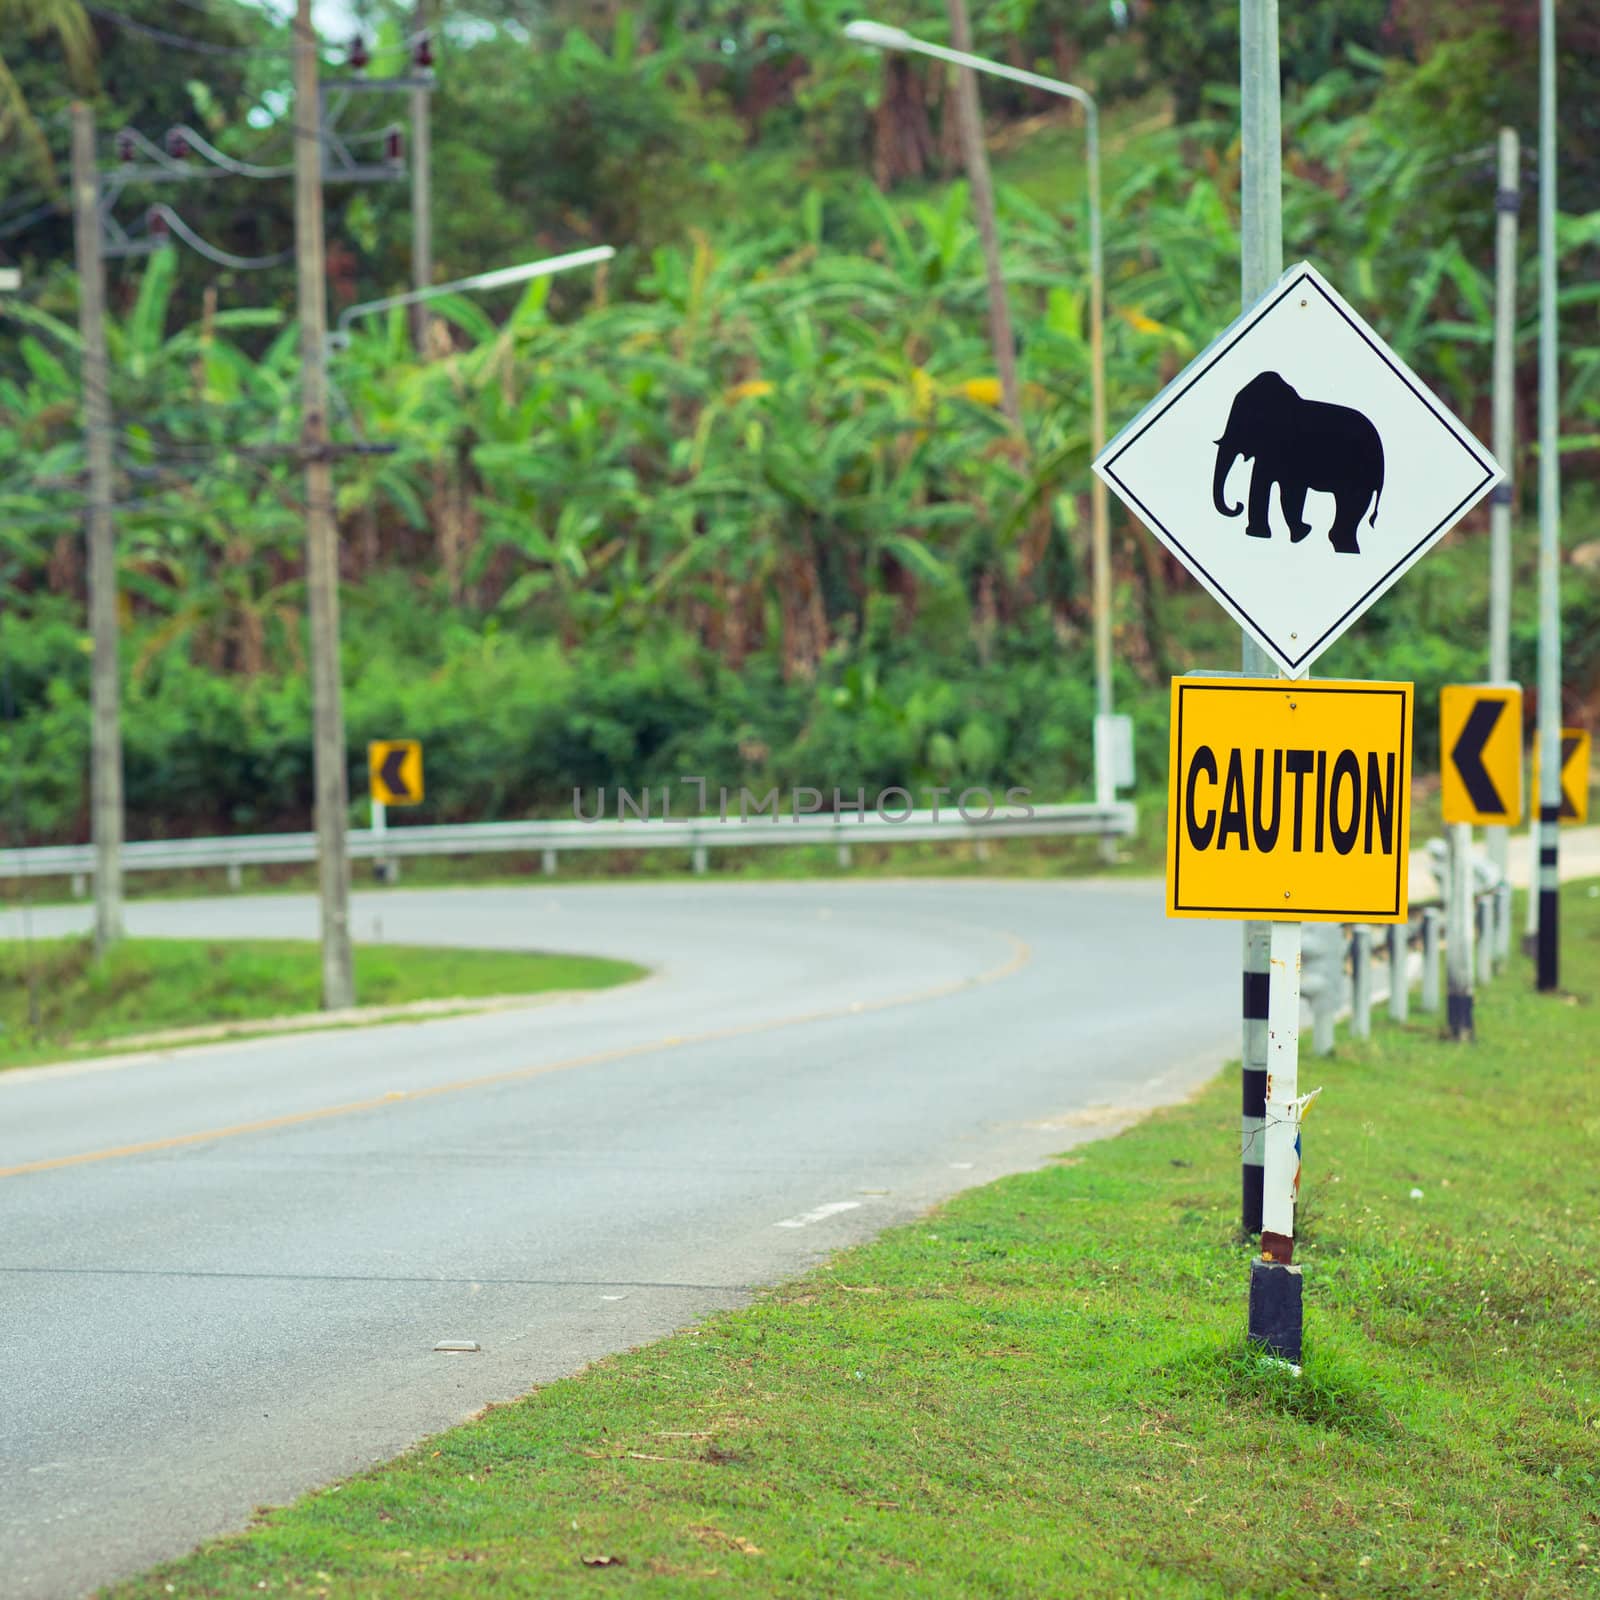 Elephant road sign in Thailand